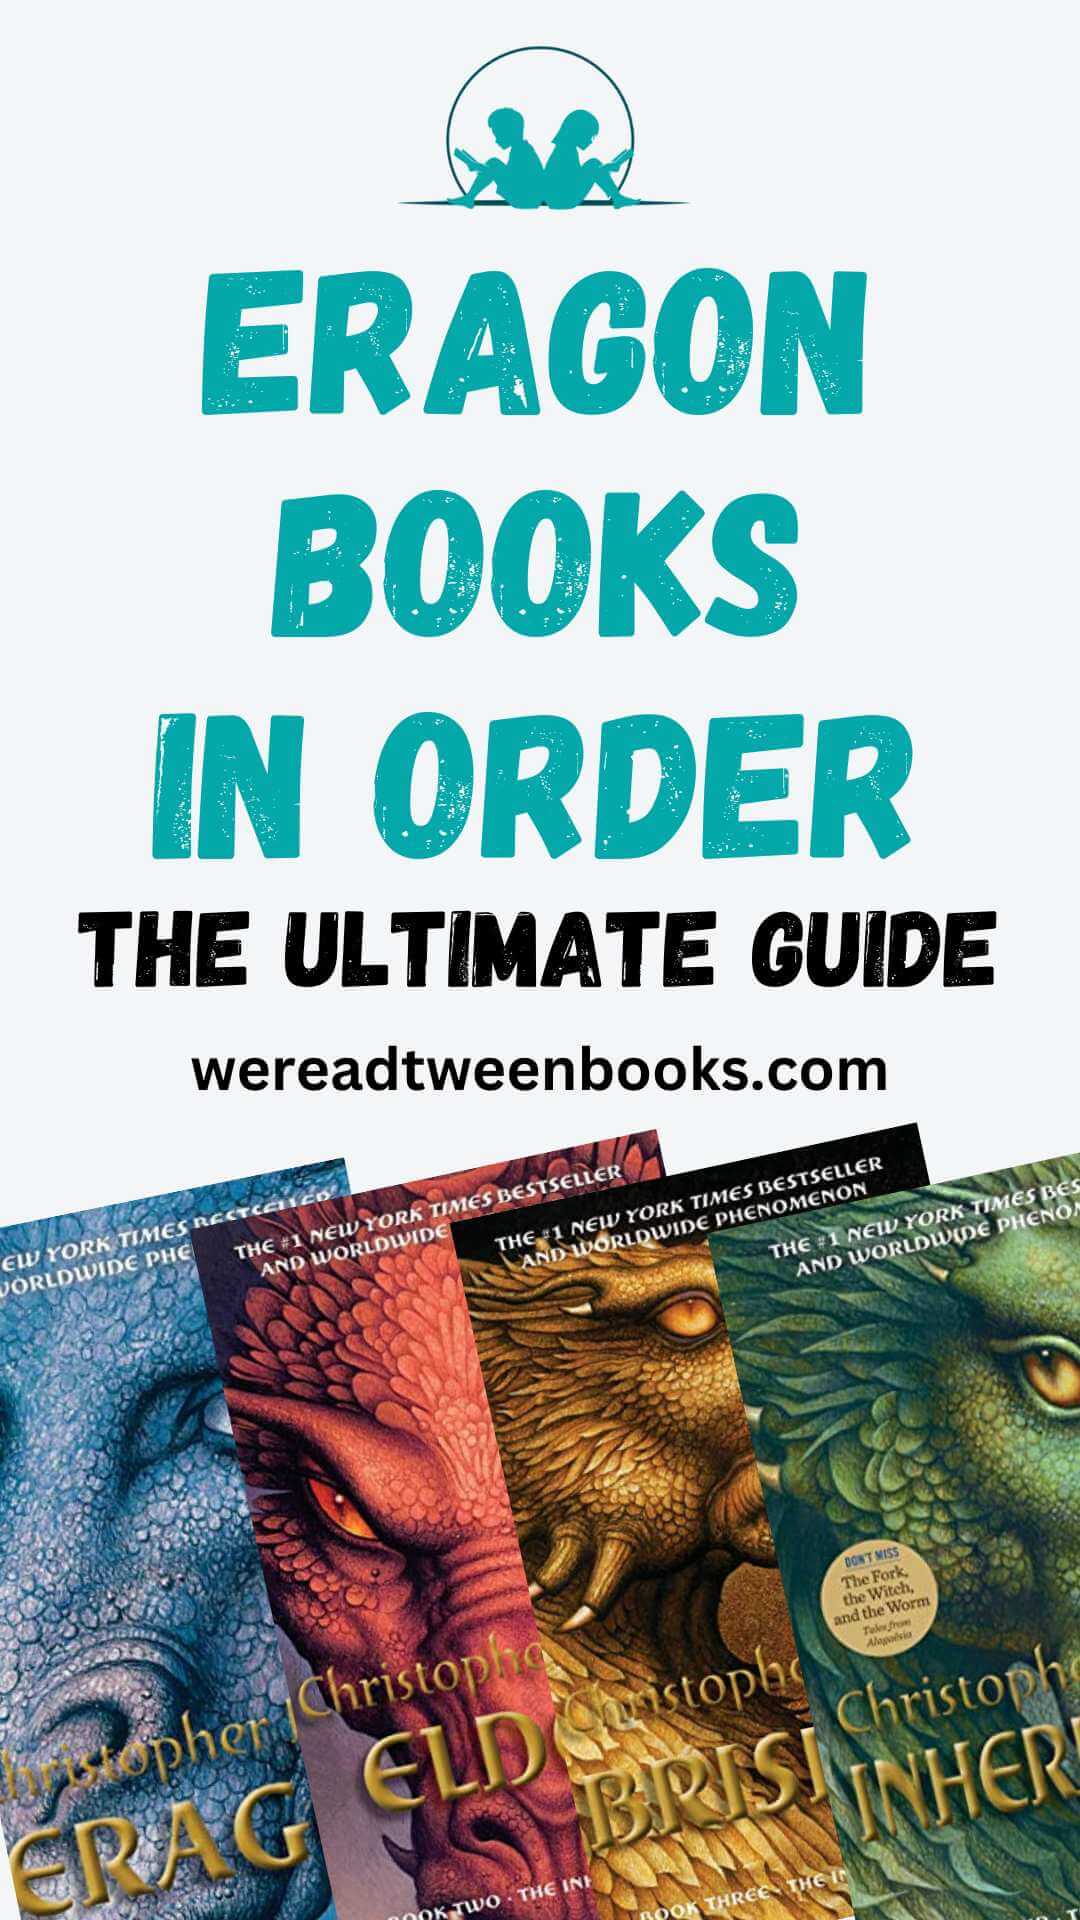 Discover all the Eragon books in order in this complete guide to the fantasy series from We Read Tween Books.